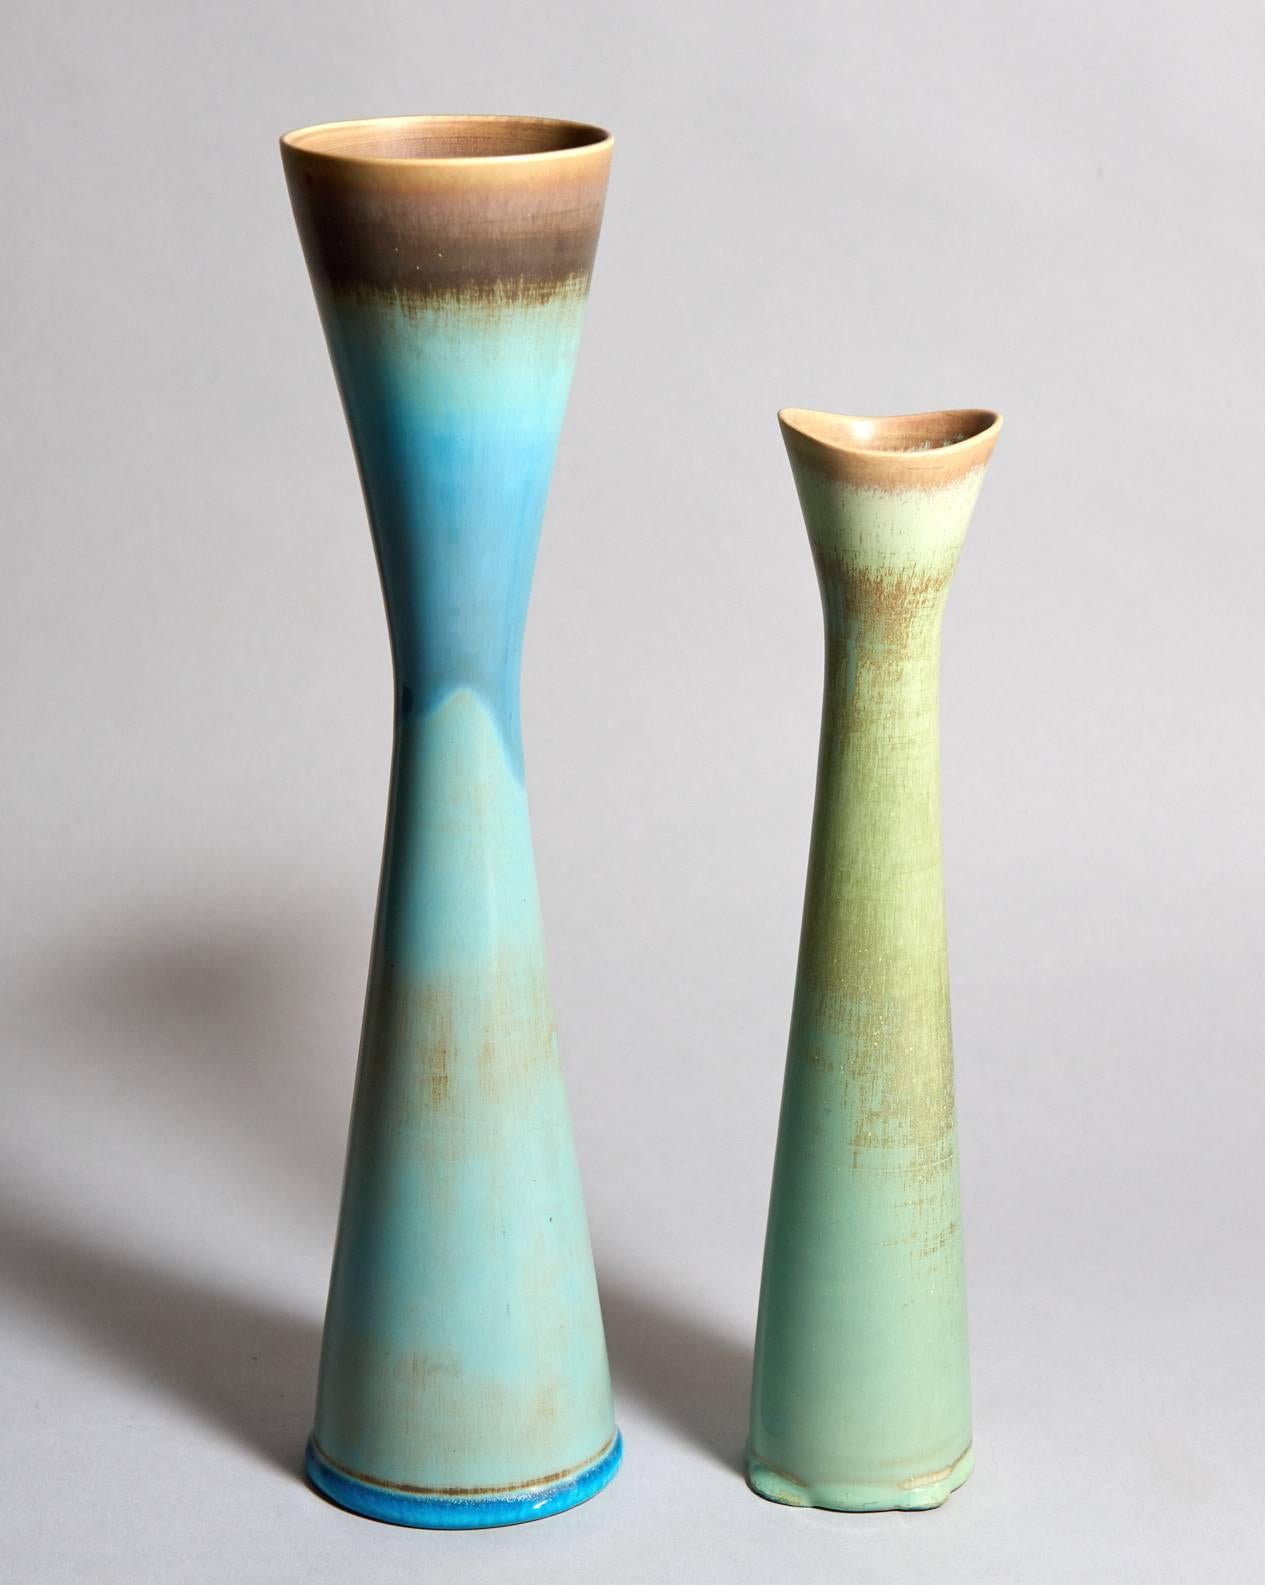 Prof. Stig Lindberg (1916-1982) was a man of very many talents, and his restless creativity yielded an amazing variety of objects. Their wide range of form, surface detail, and glaze color makes any grouping of these unique stoneware studio vases a